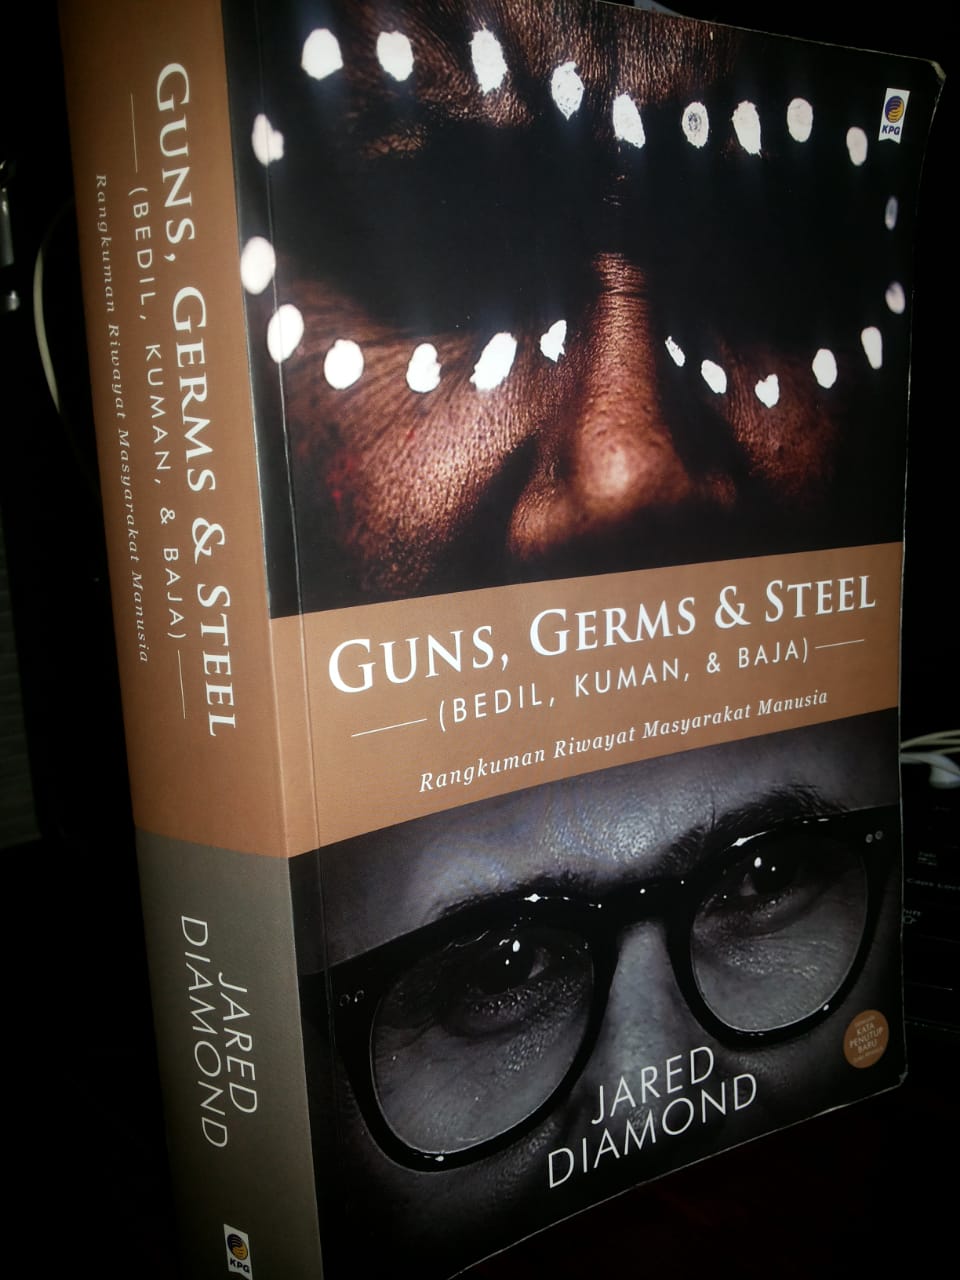 book review of guns germs and steel